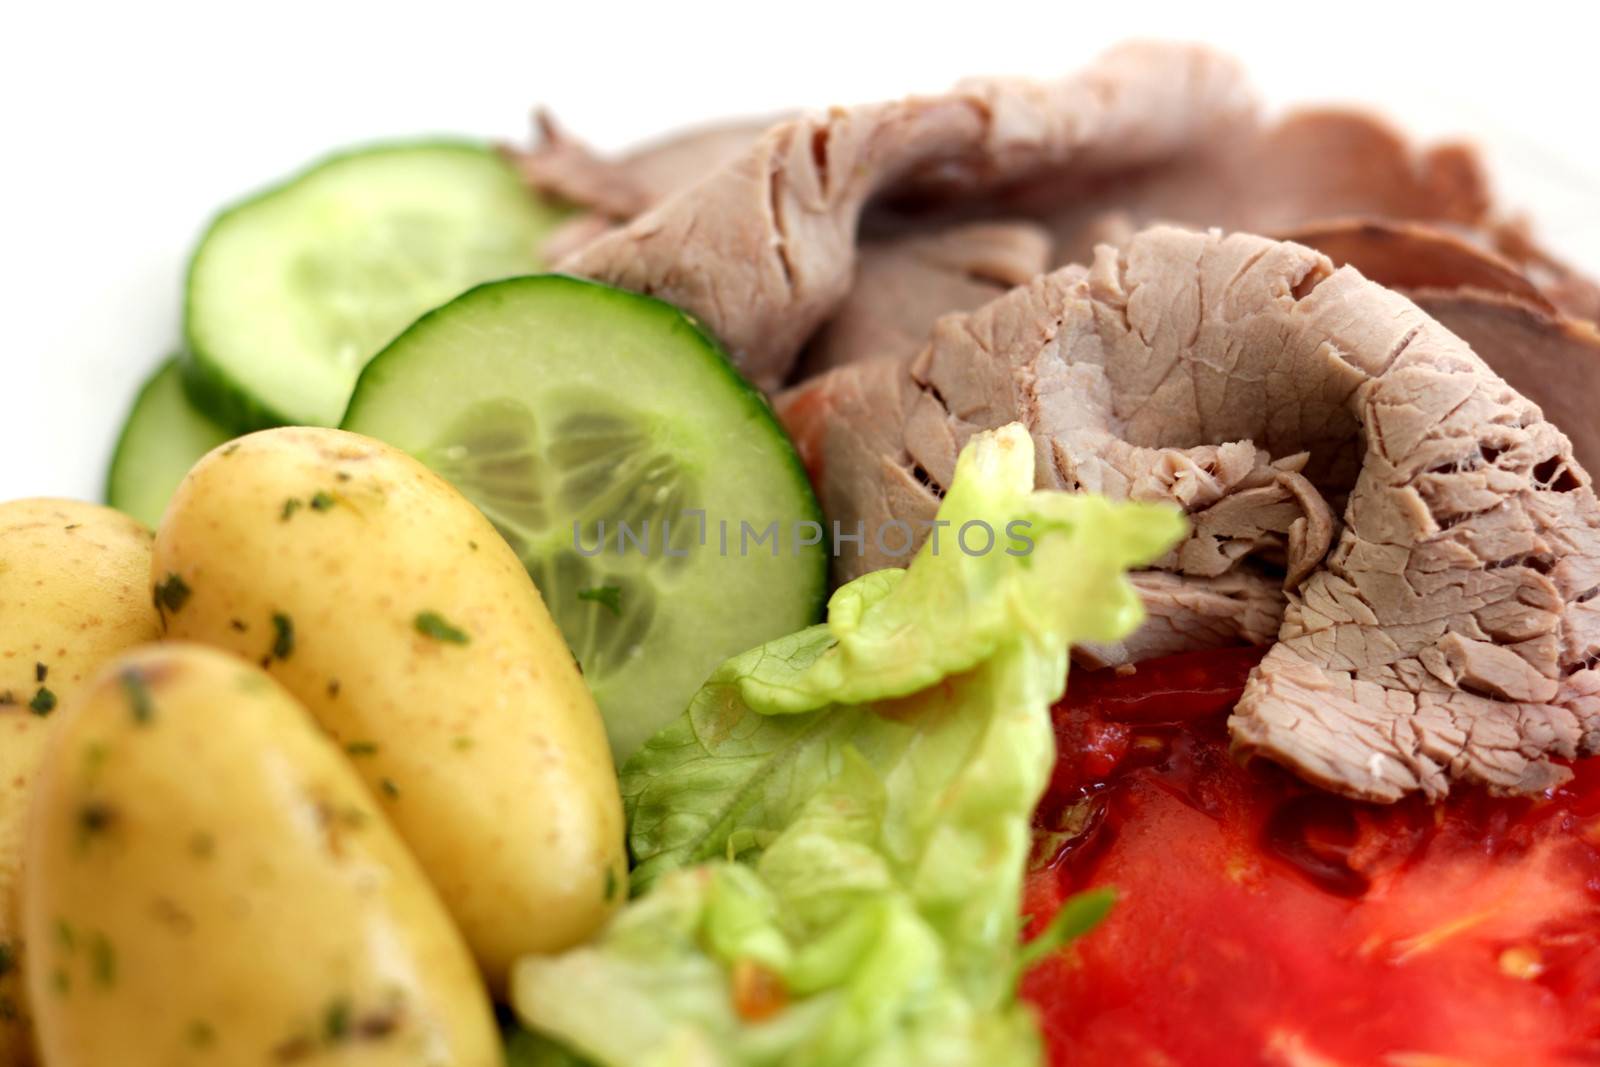 Roast Beef Salad with New Boiled Potatoes by Whiteboxmedia